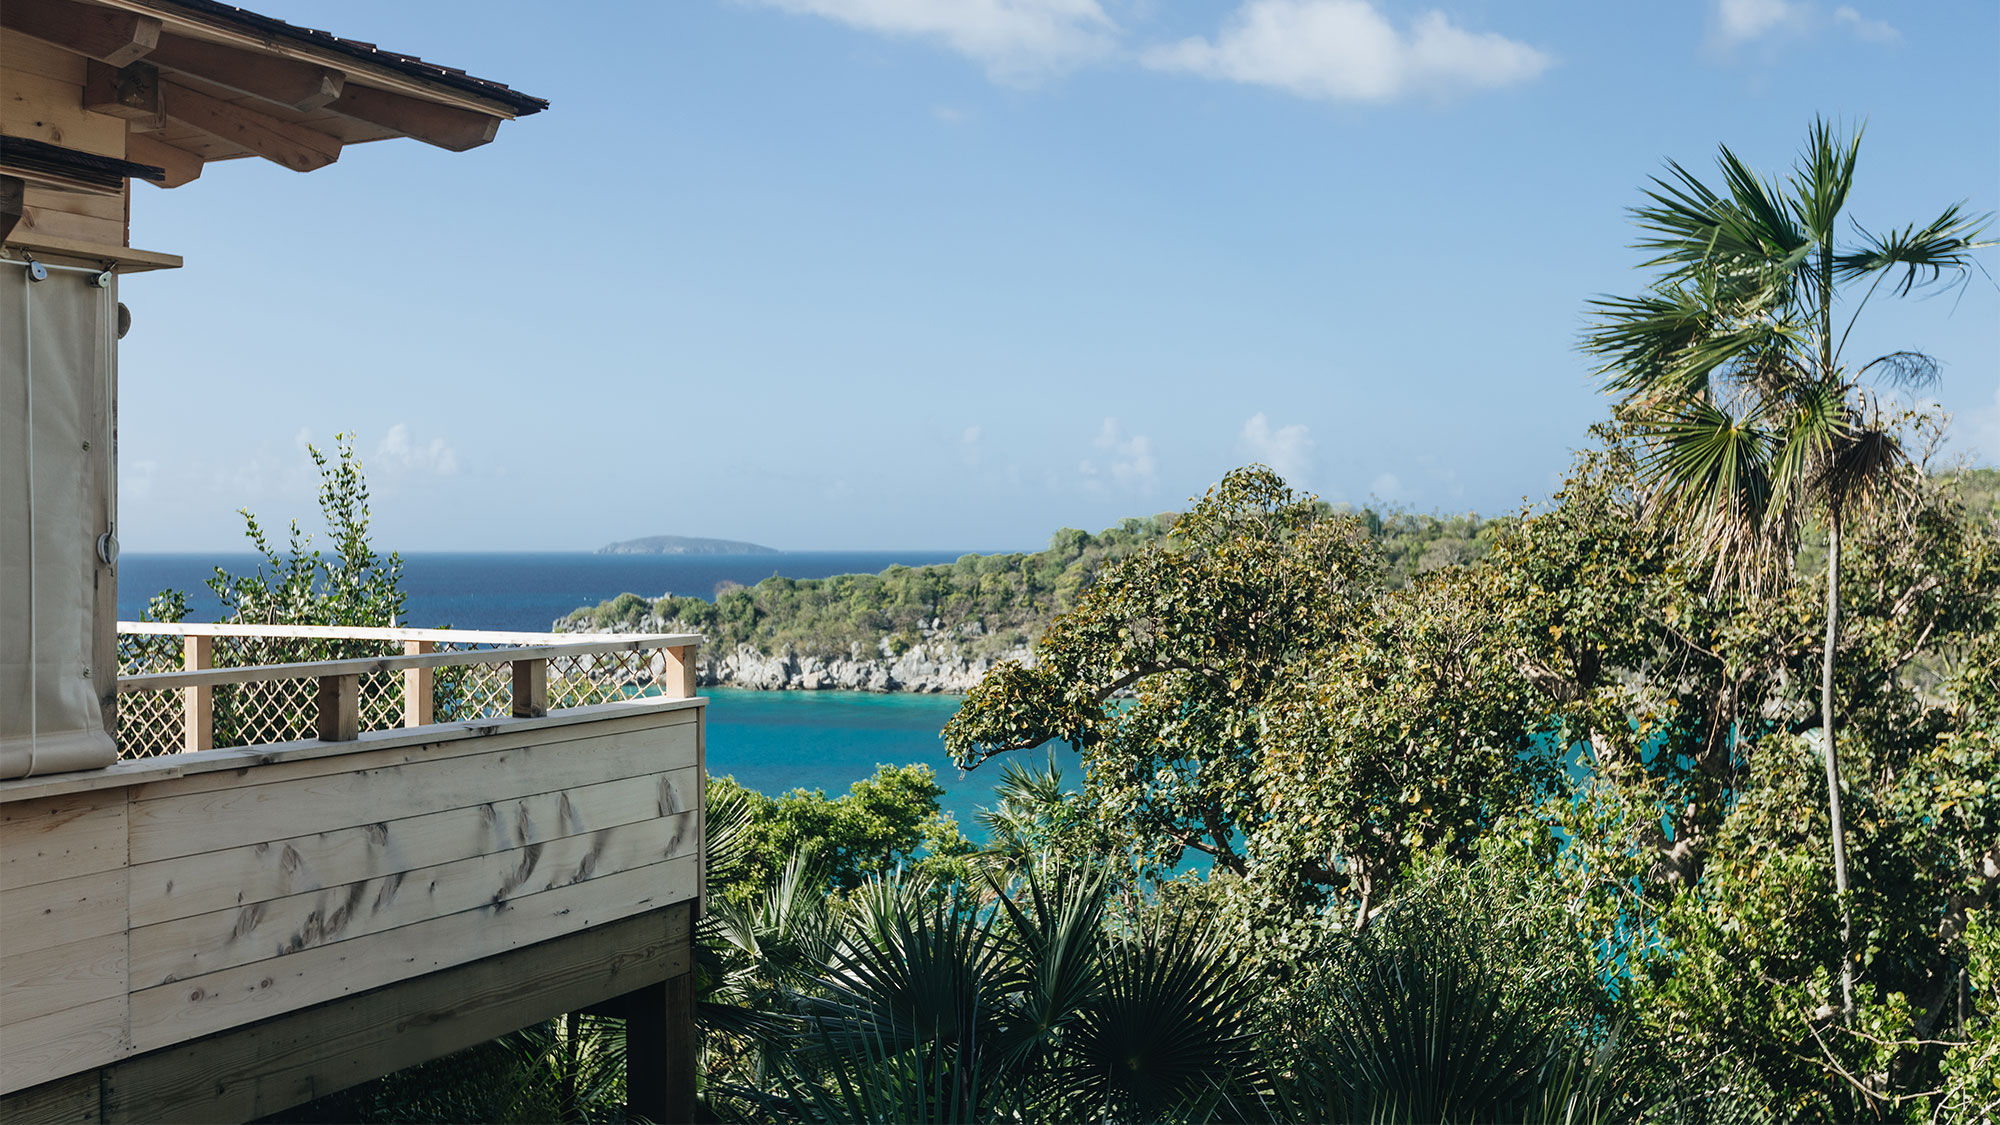 The Lovango Resort and Beach Club on St. John is partially powered by a combination of solar and wind.